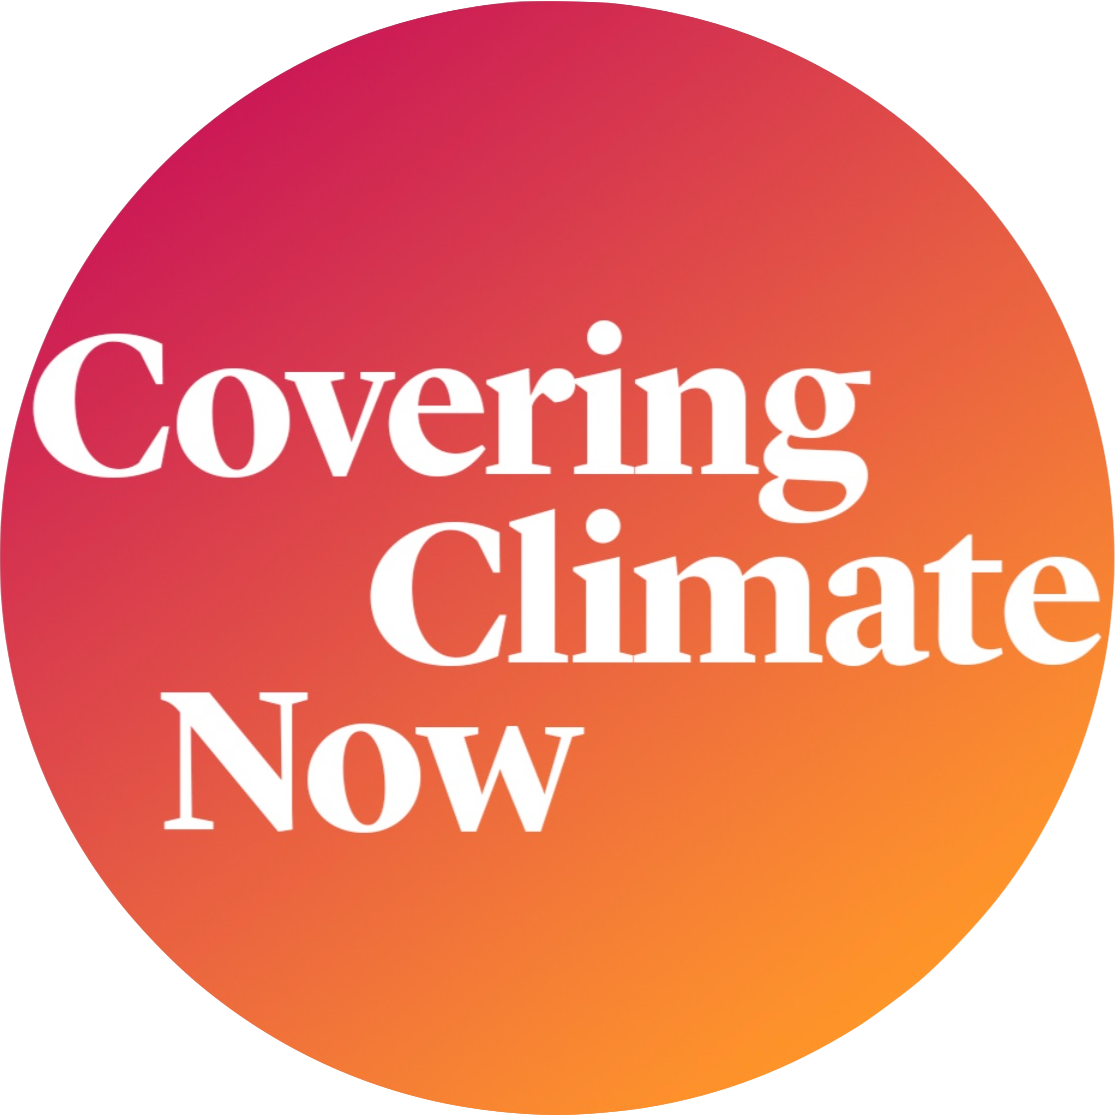 Covering Climate Now logo